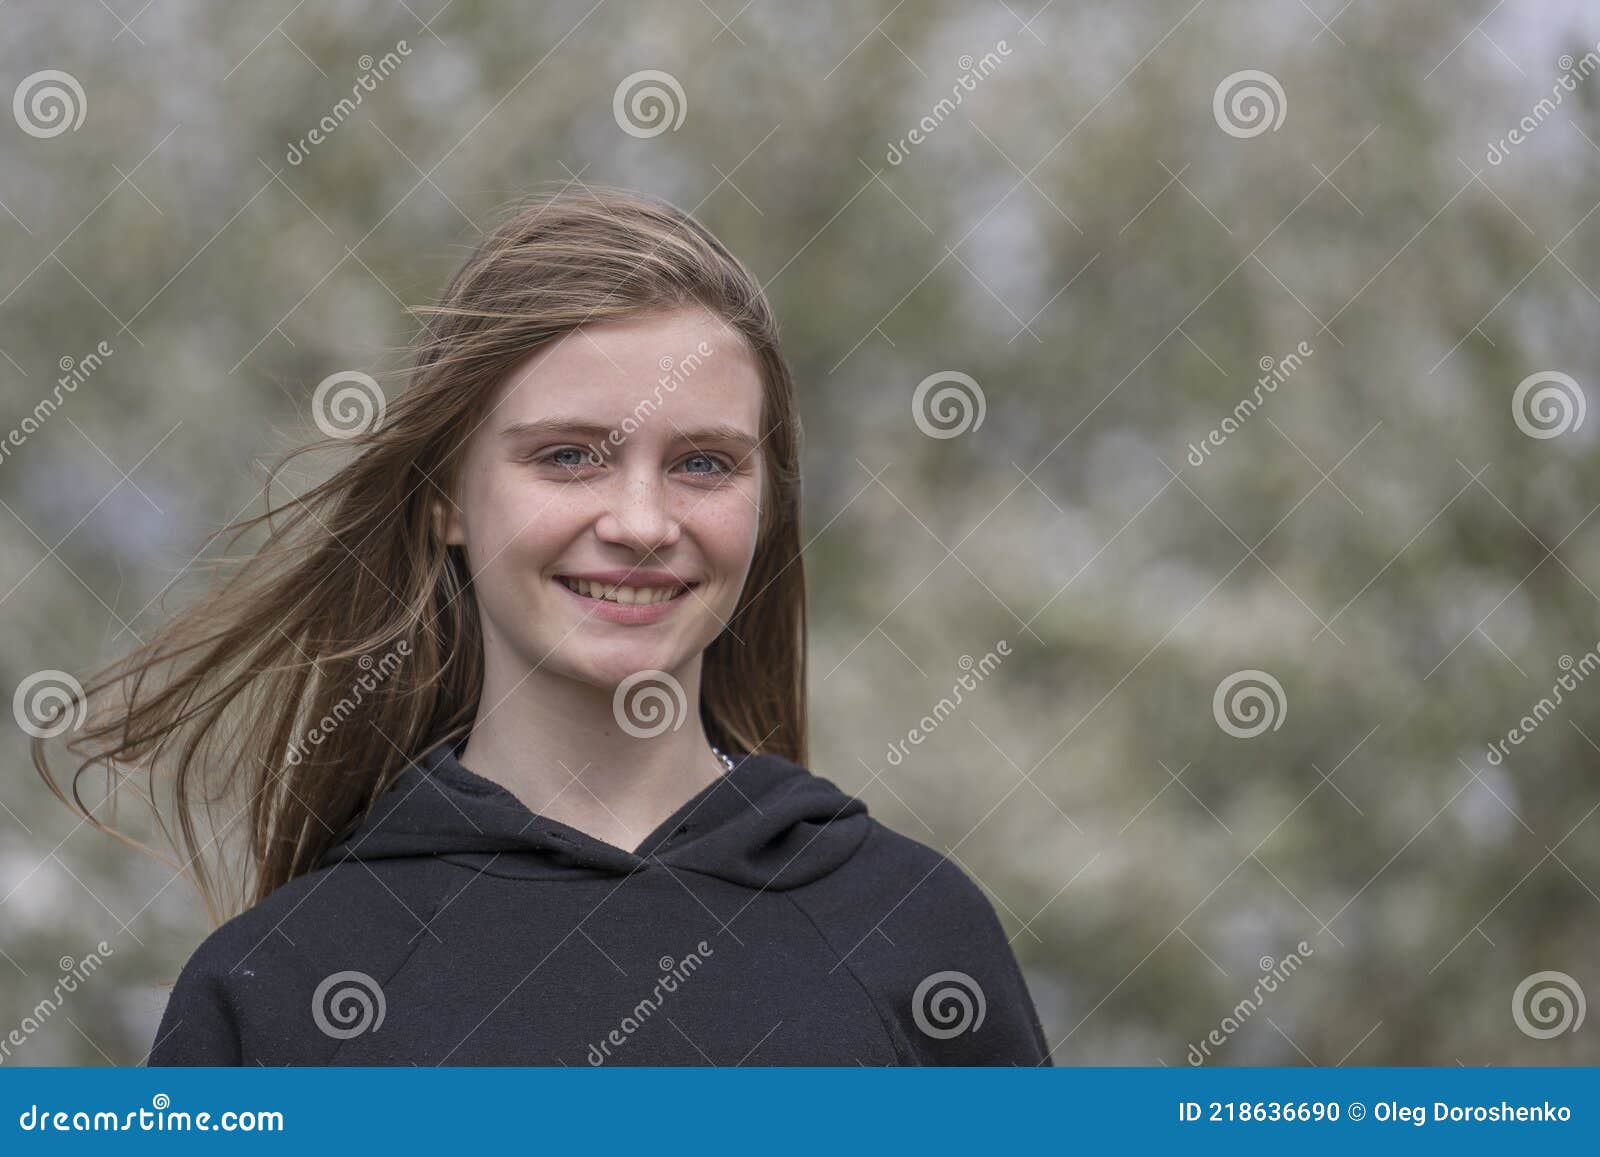 Beautiful Happy Young Girl in Nature. Close Up Portrait Stock Photo ...